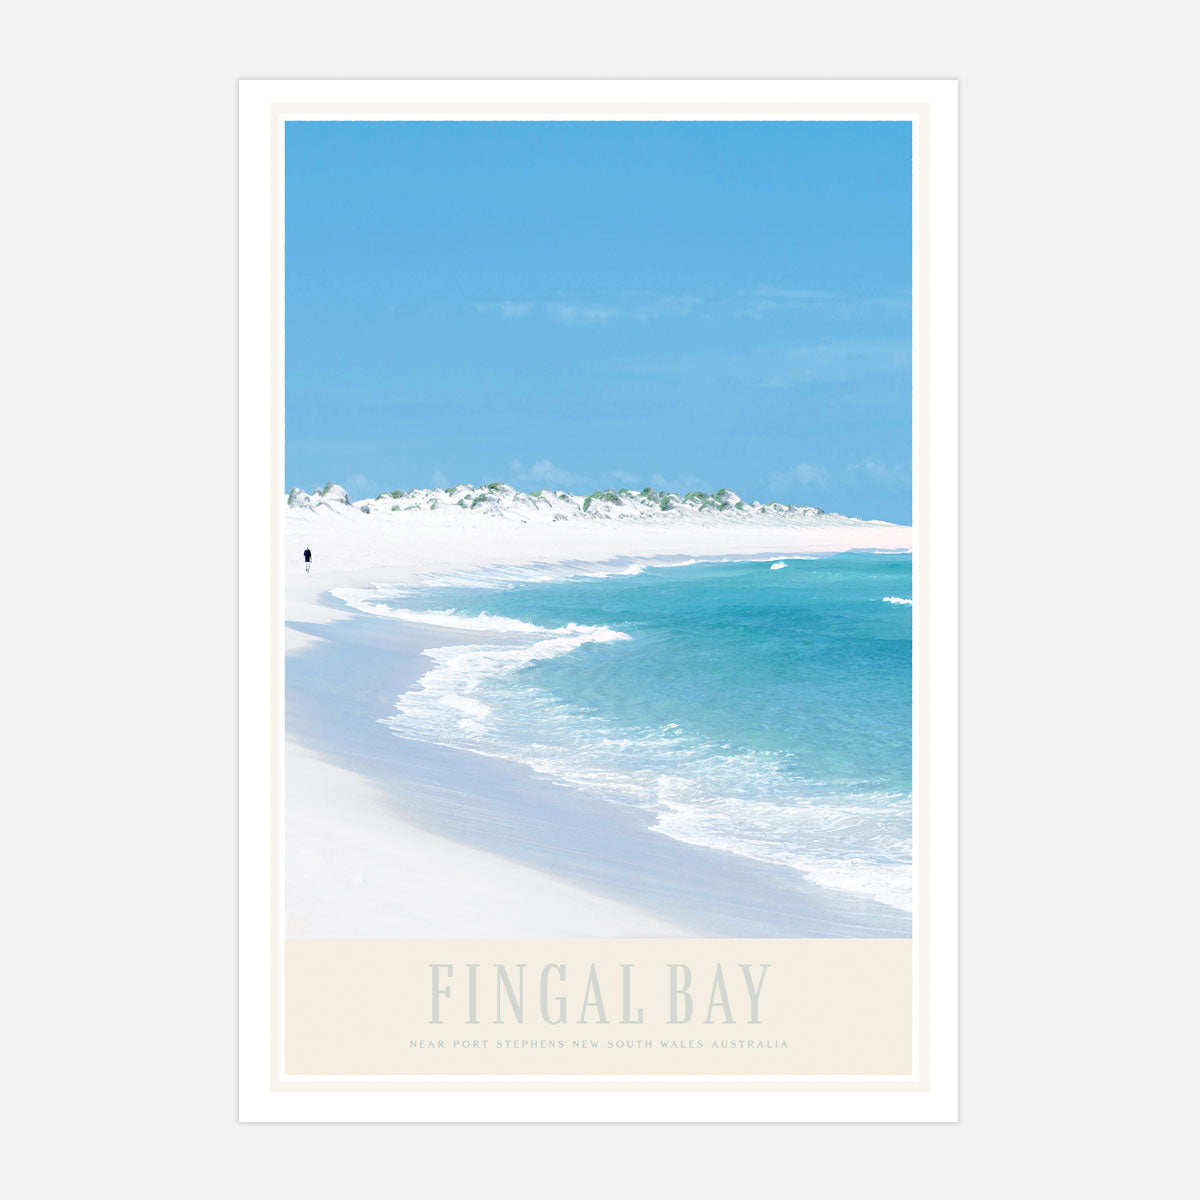 Fingal bay vintage retro print by places we luv